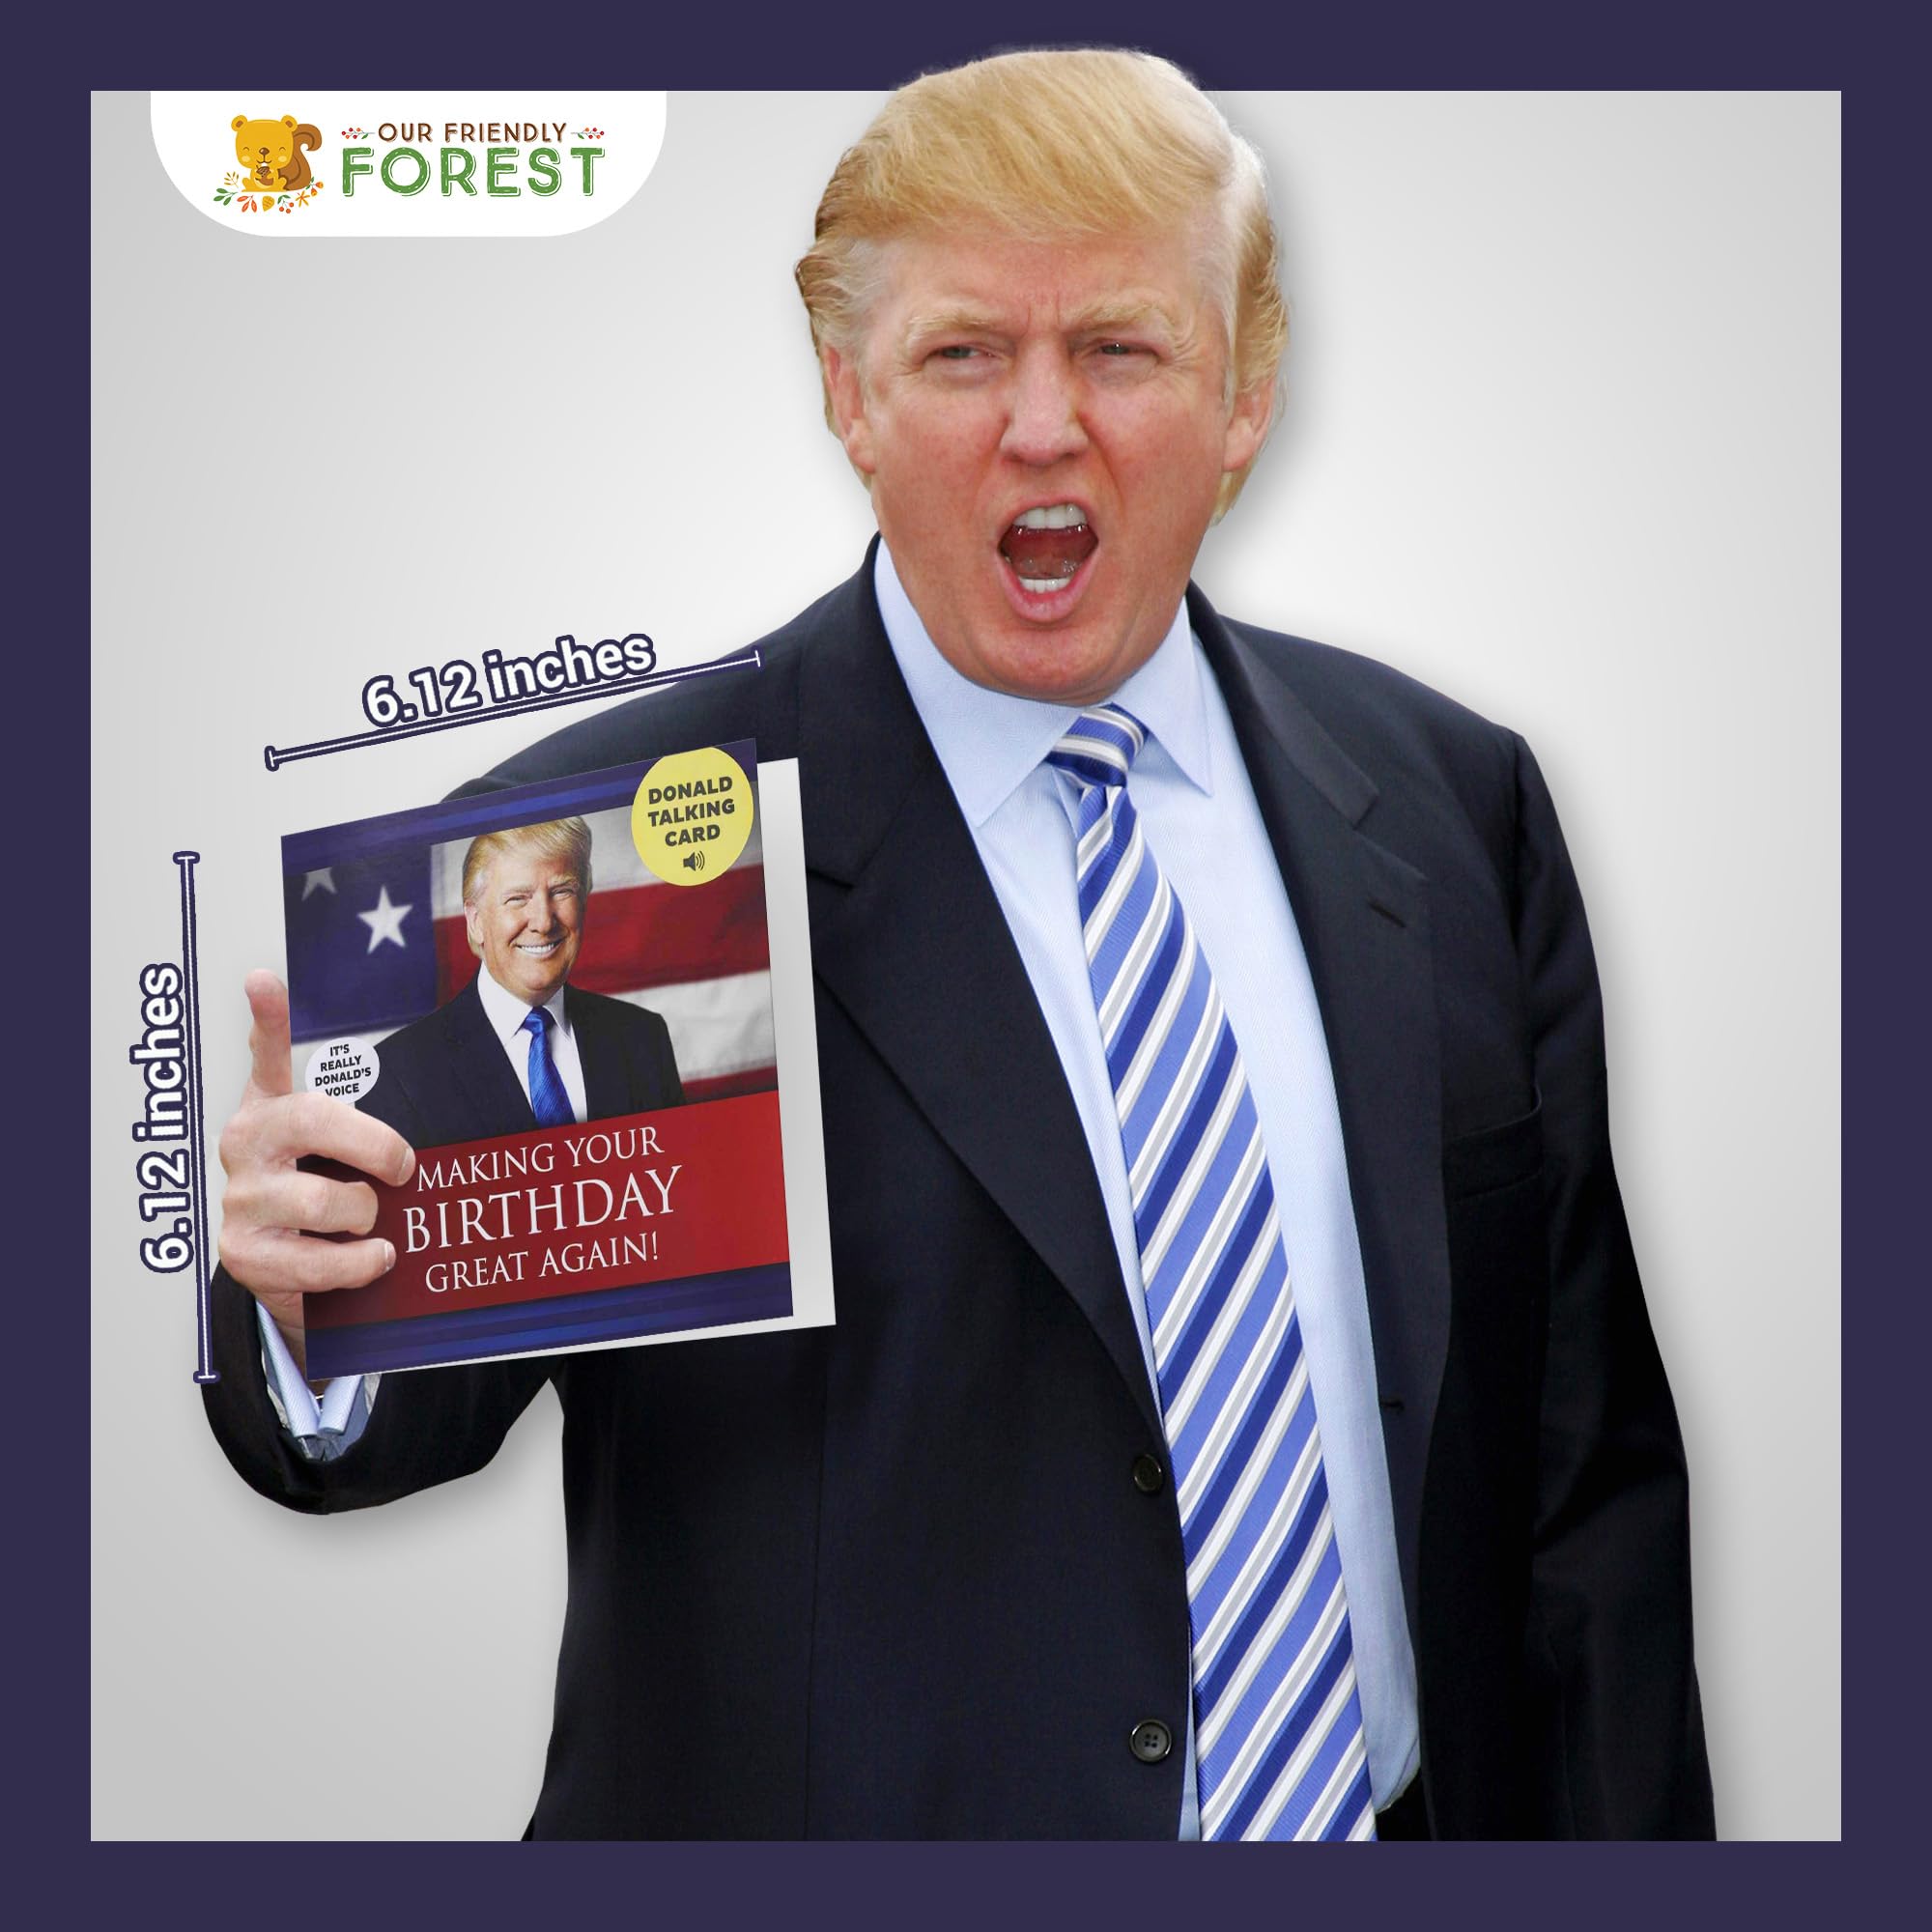 Talking Trump Birthday Card w/Trump's REAL Voice (Red) - The Best Donald Trump Gifts for Men Created, Funny Birthday Cards for Women, Birthday Gift for Husband, Unique Trump Birthday Cards for Men